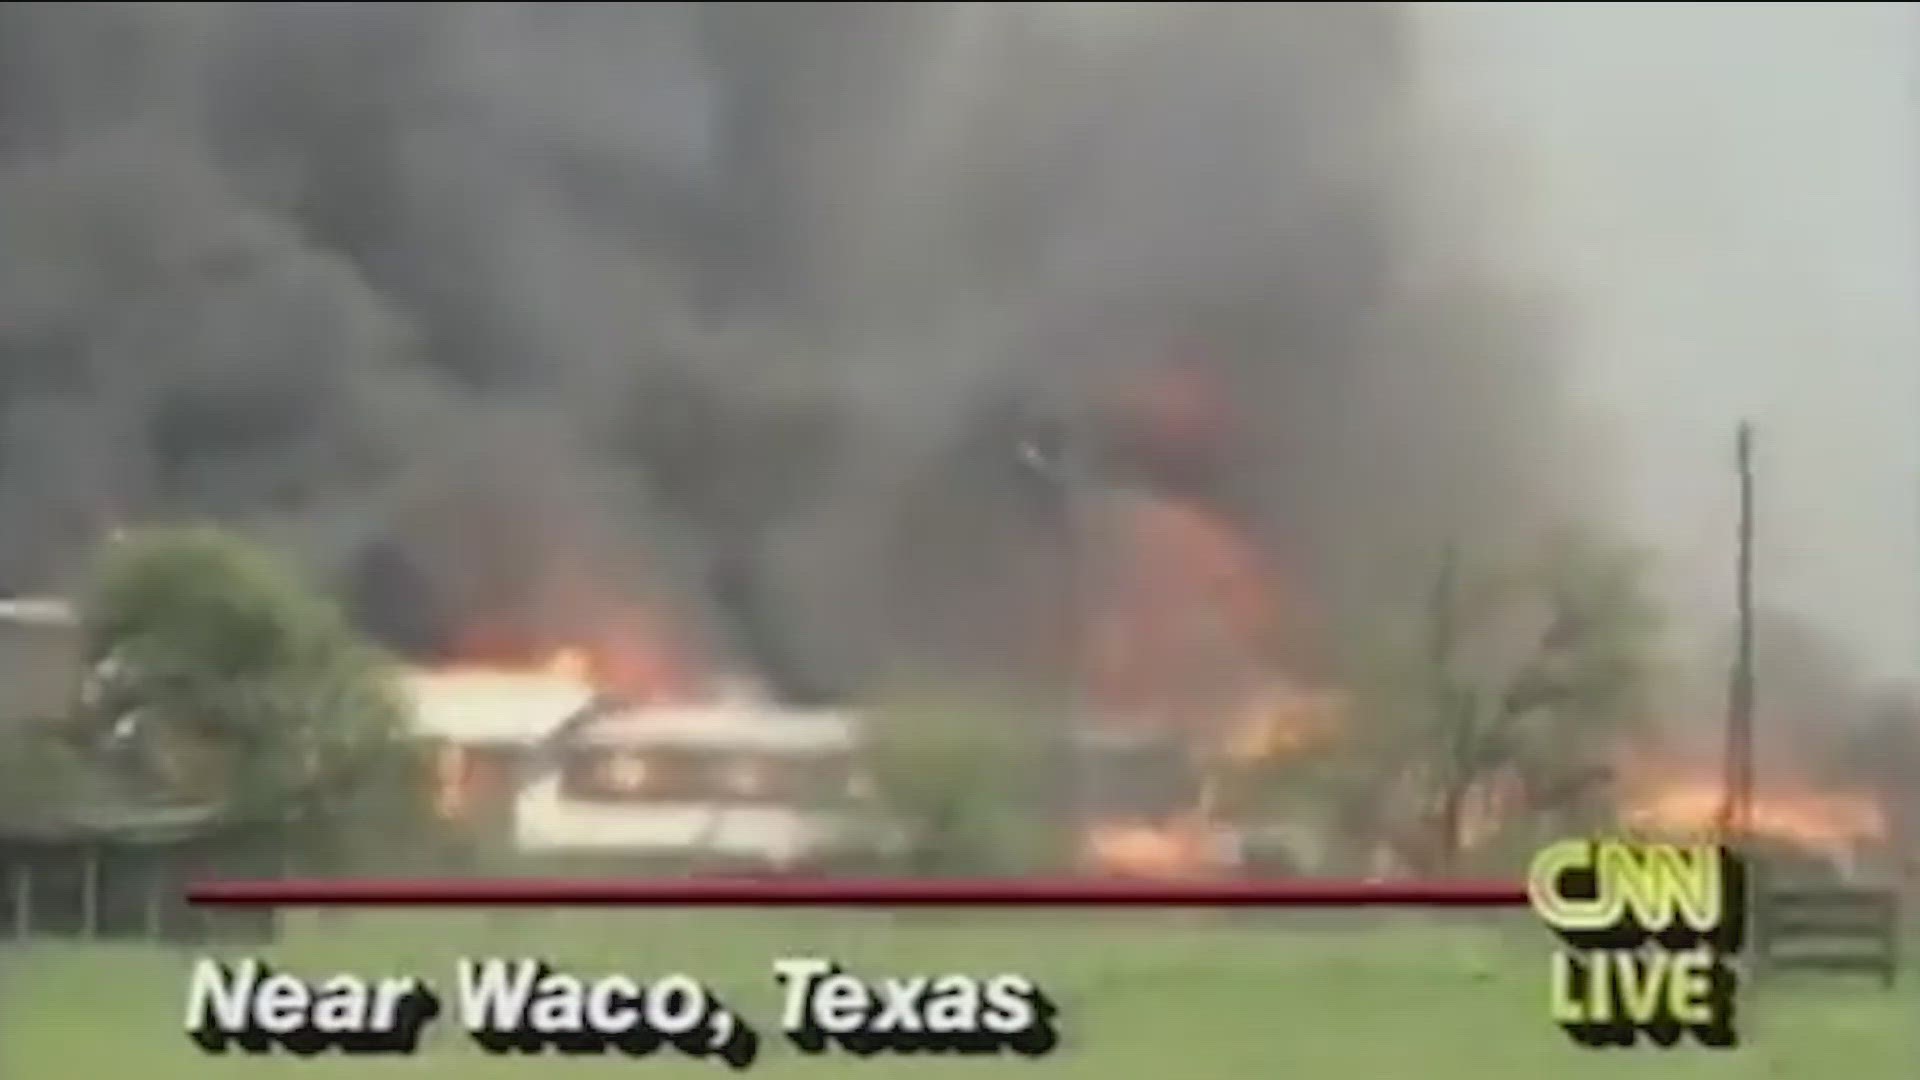 Thirty years have passed since one of the most tragic events in Texas history. On April 19, 1993, a 51-day standoff came to a deadly end just outside of Waco.